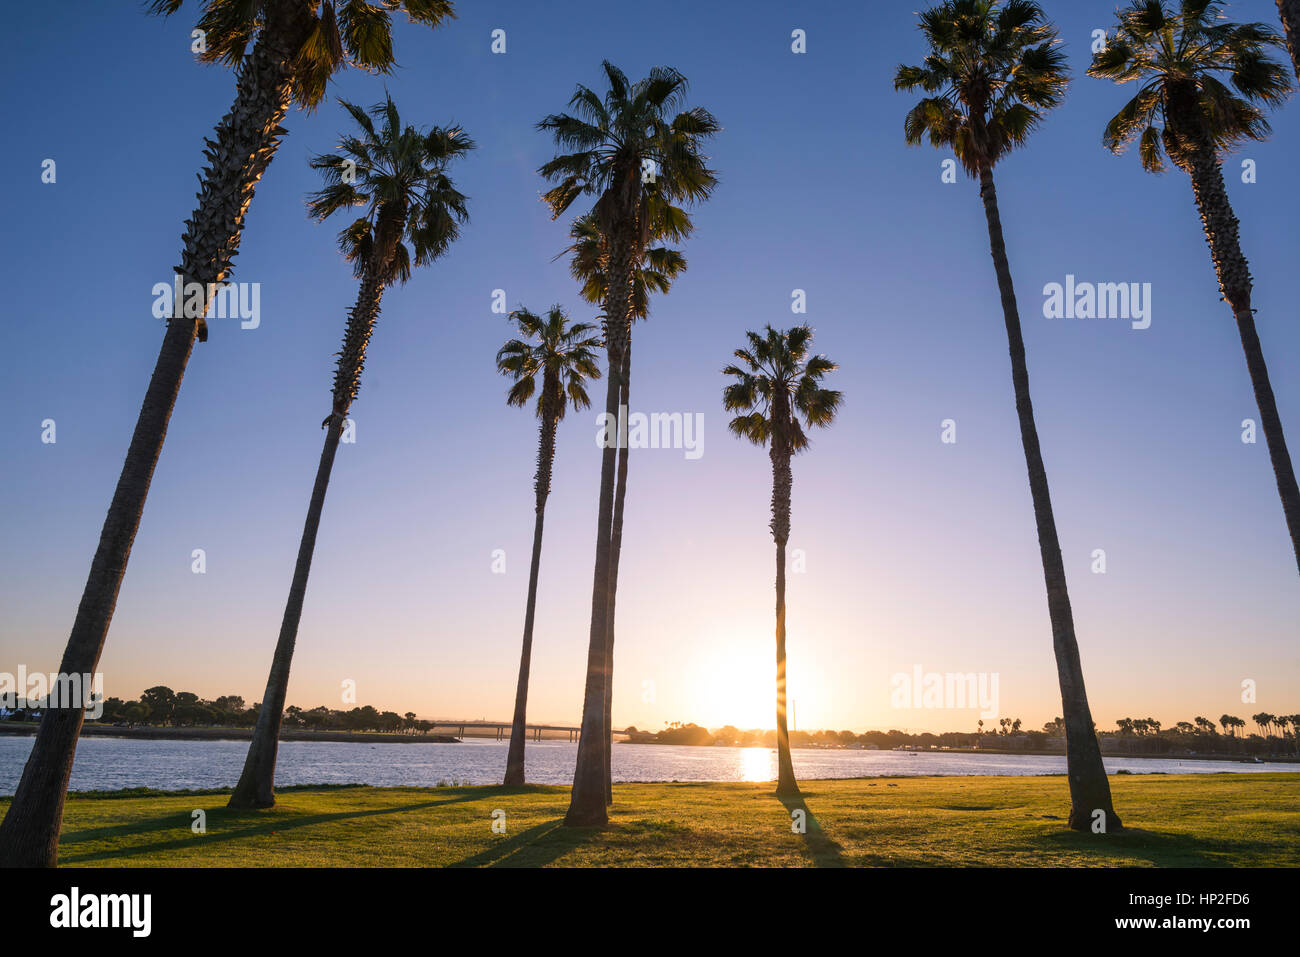 Group of palm trees in the early morning at Mission Bay Park. San Diego, California, USA. Stock Photo